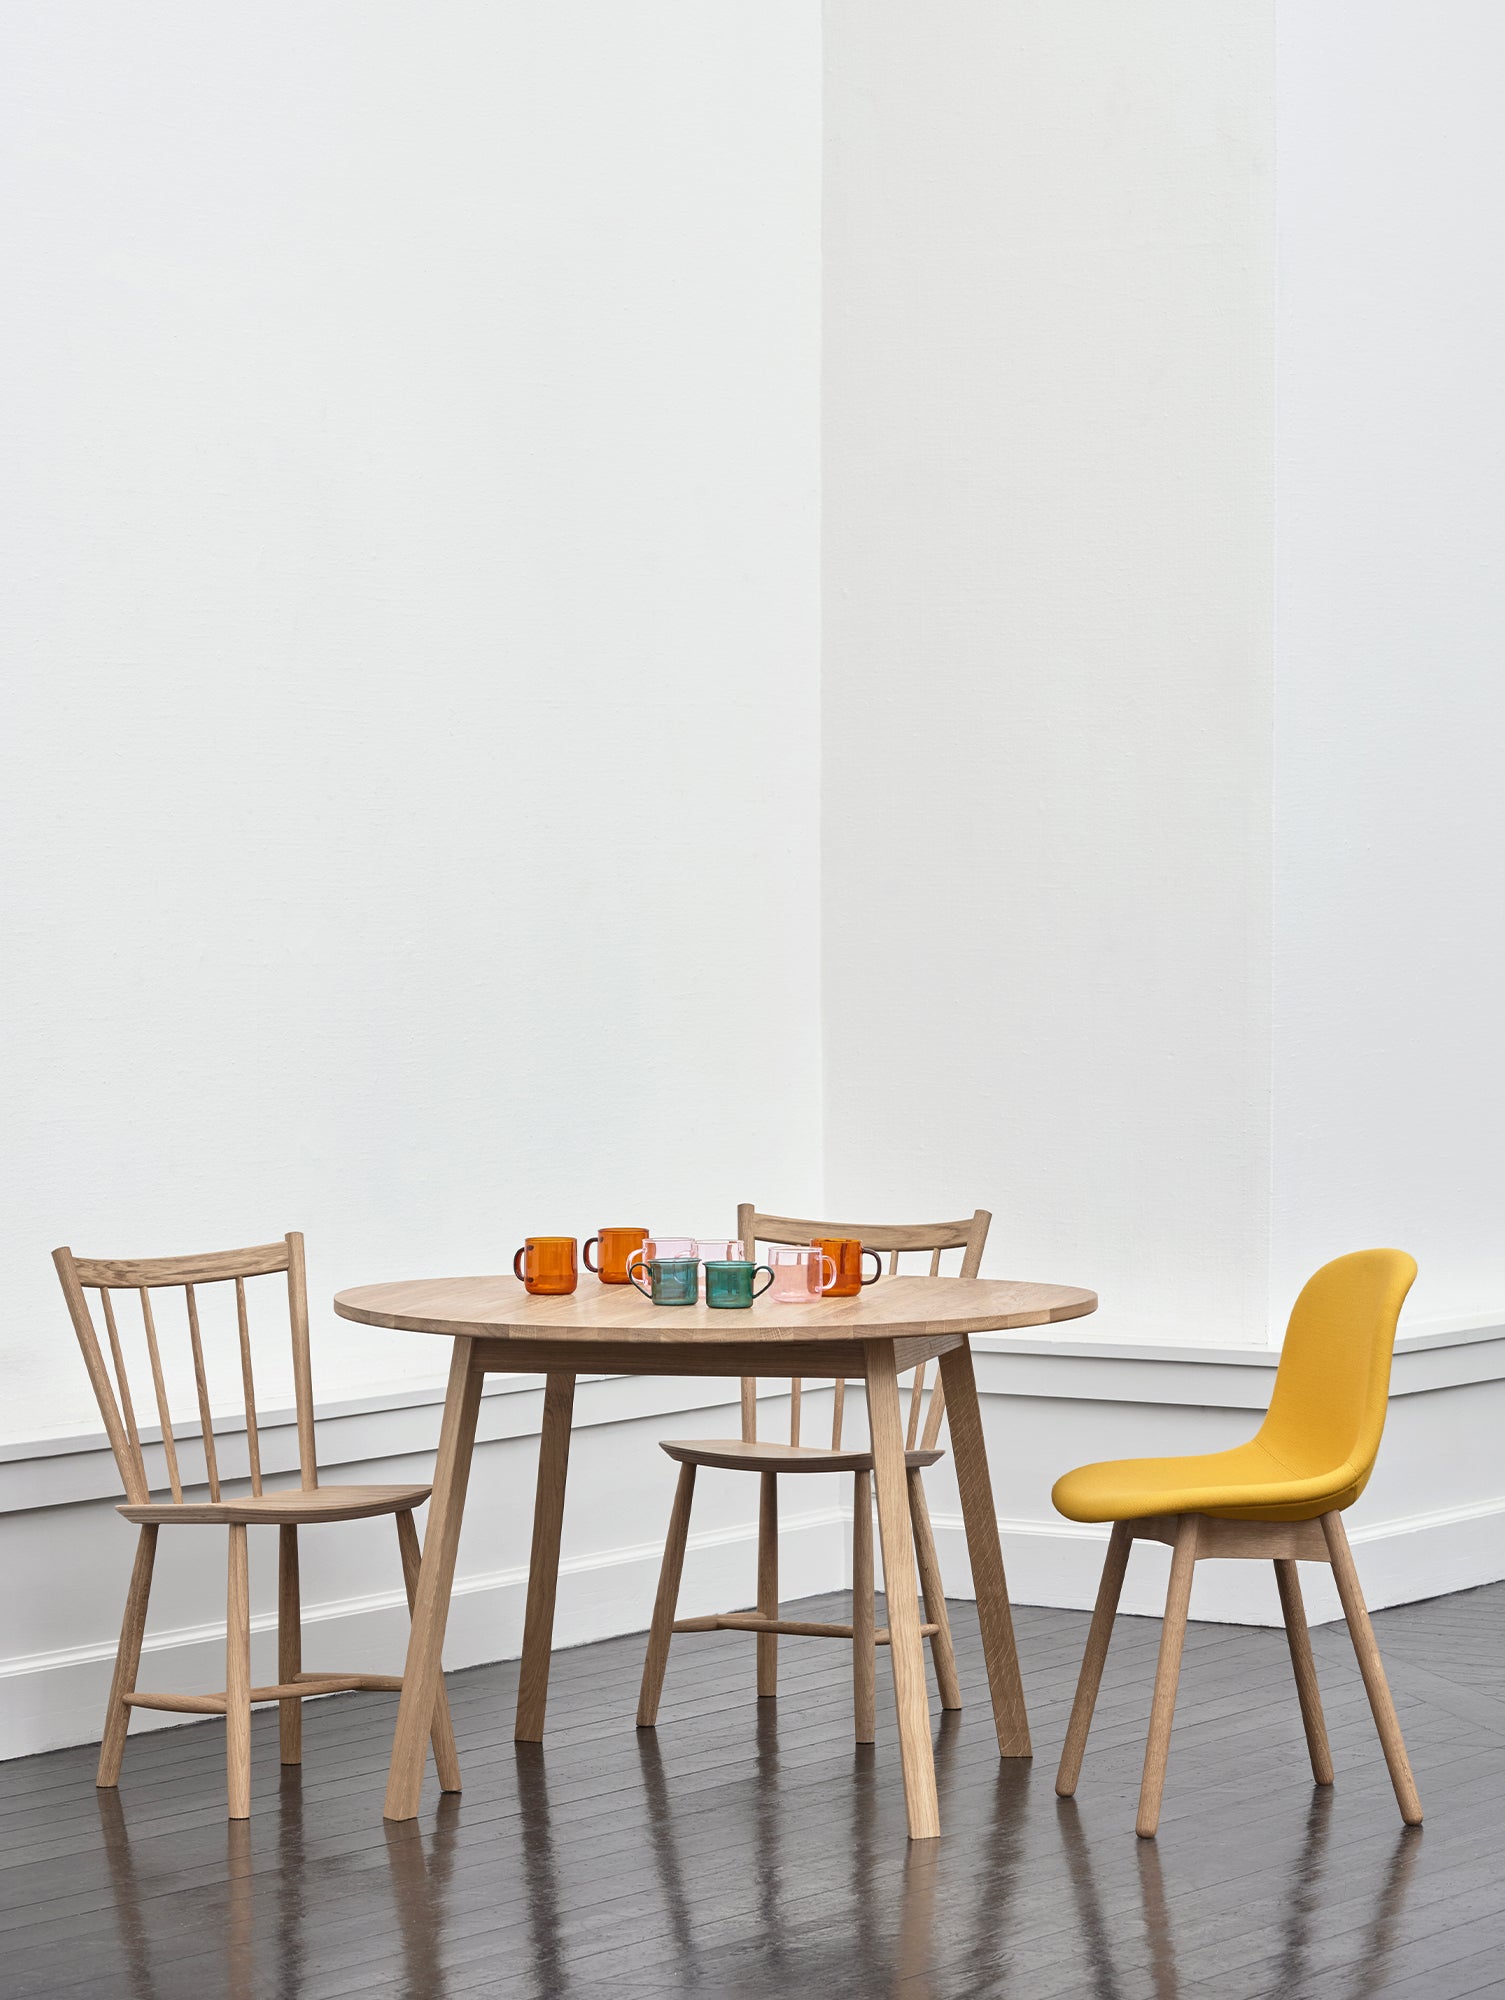 J41 Chair by HAY